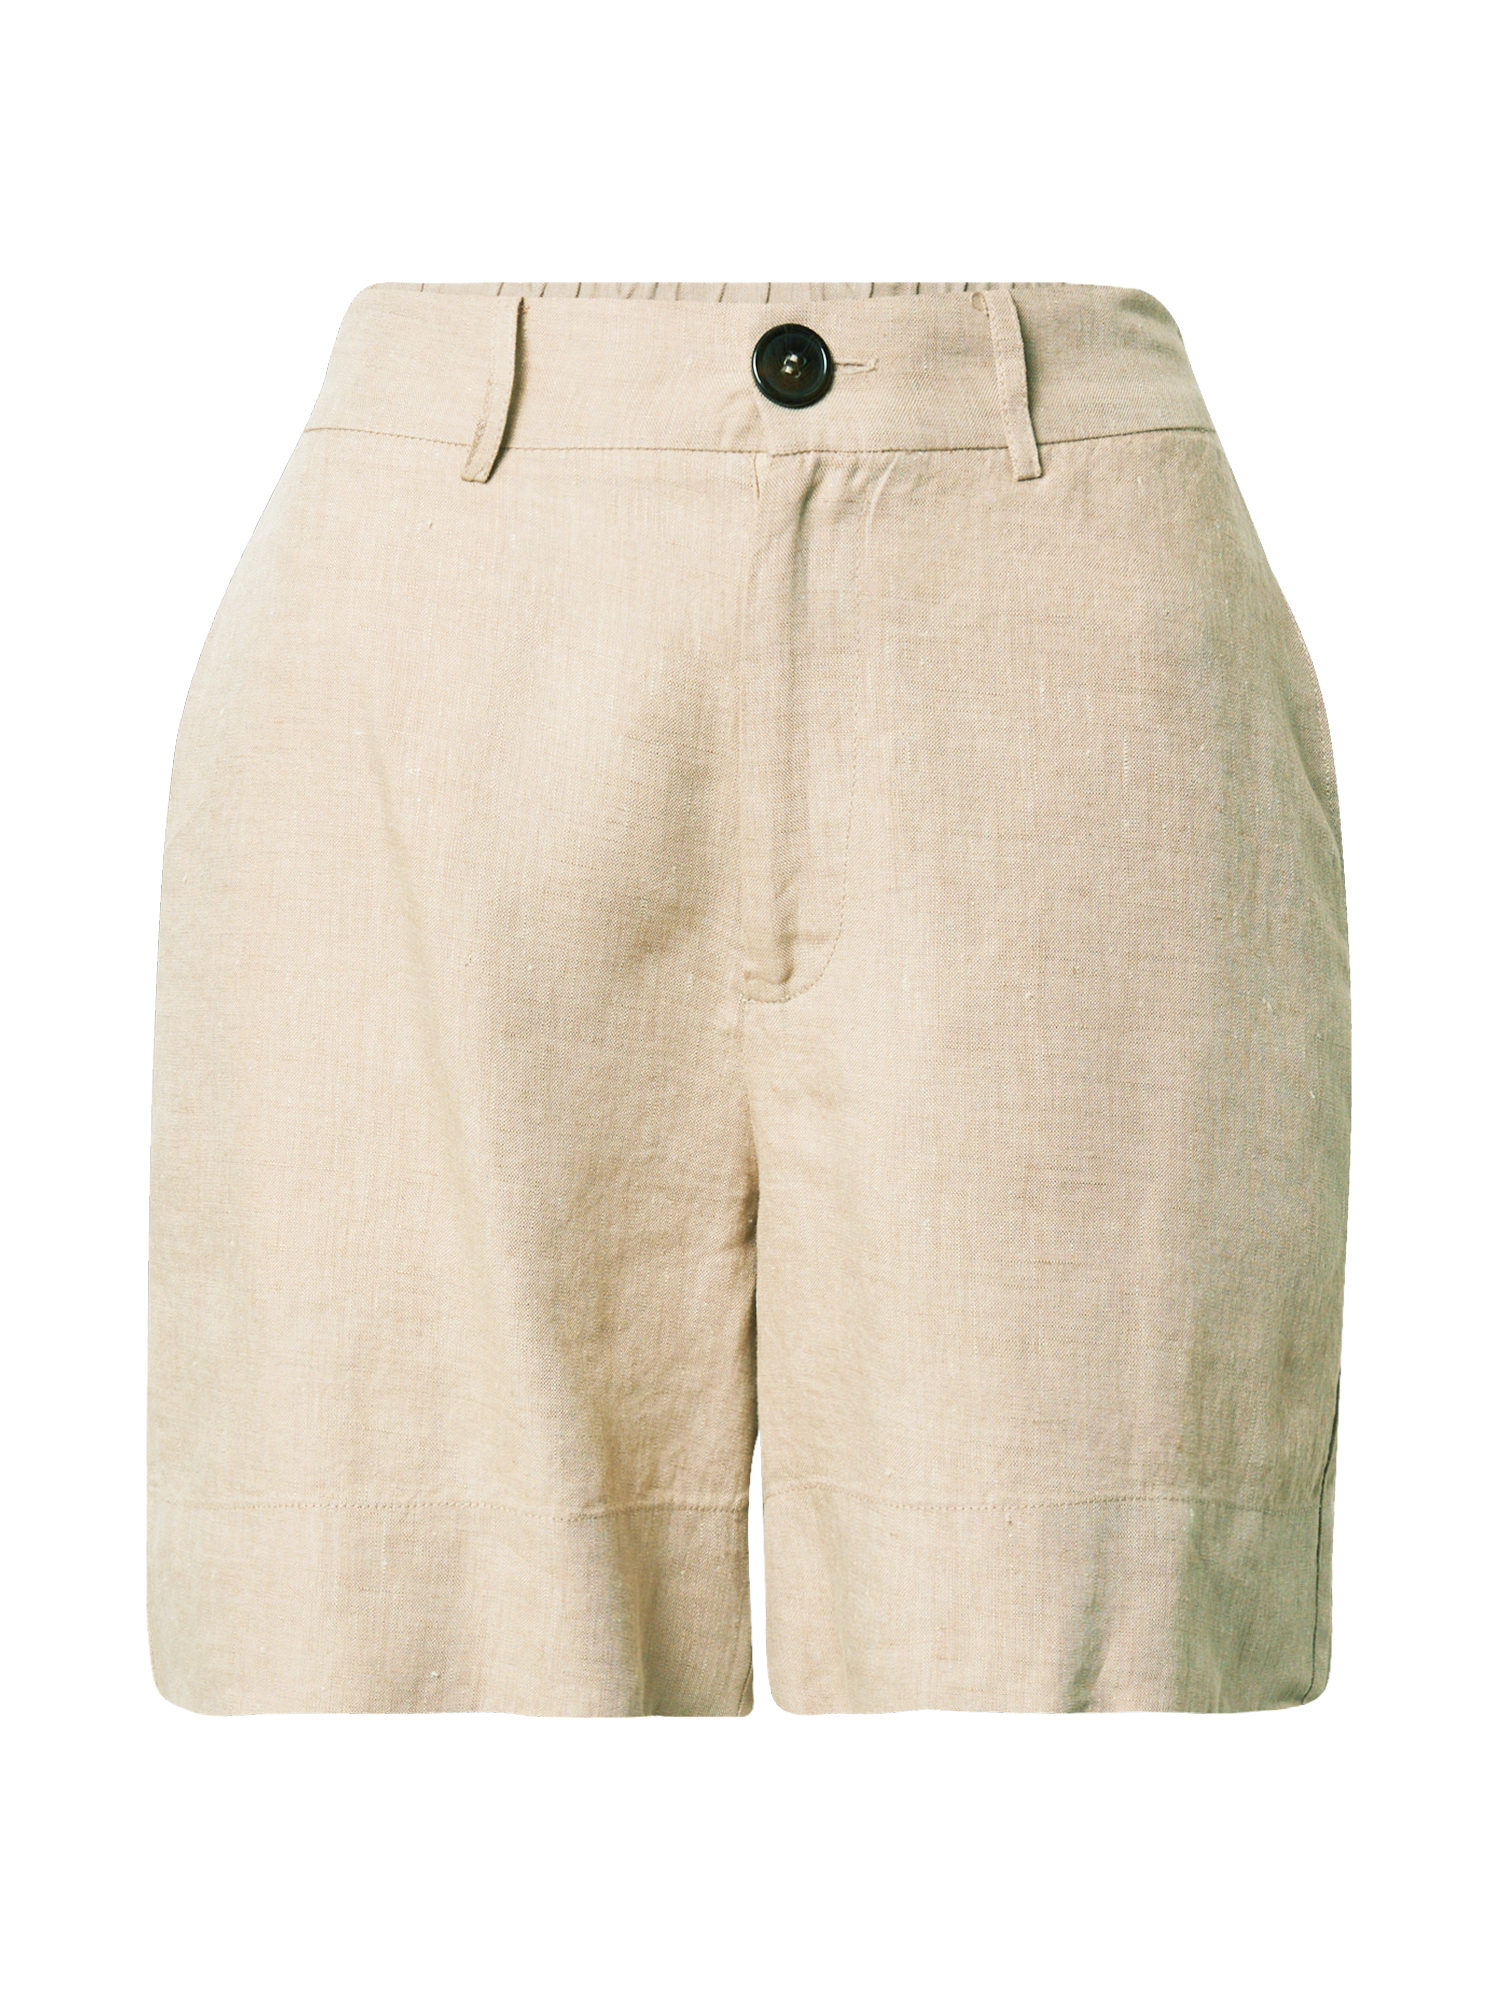 Donna PROMO Twist & Tango Shorts MARY in Beige 